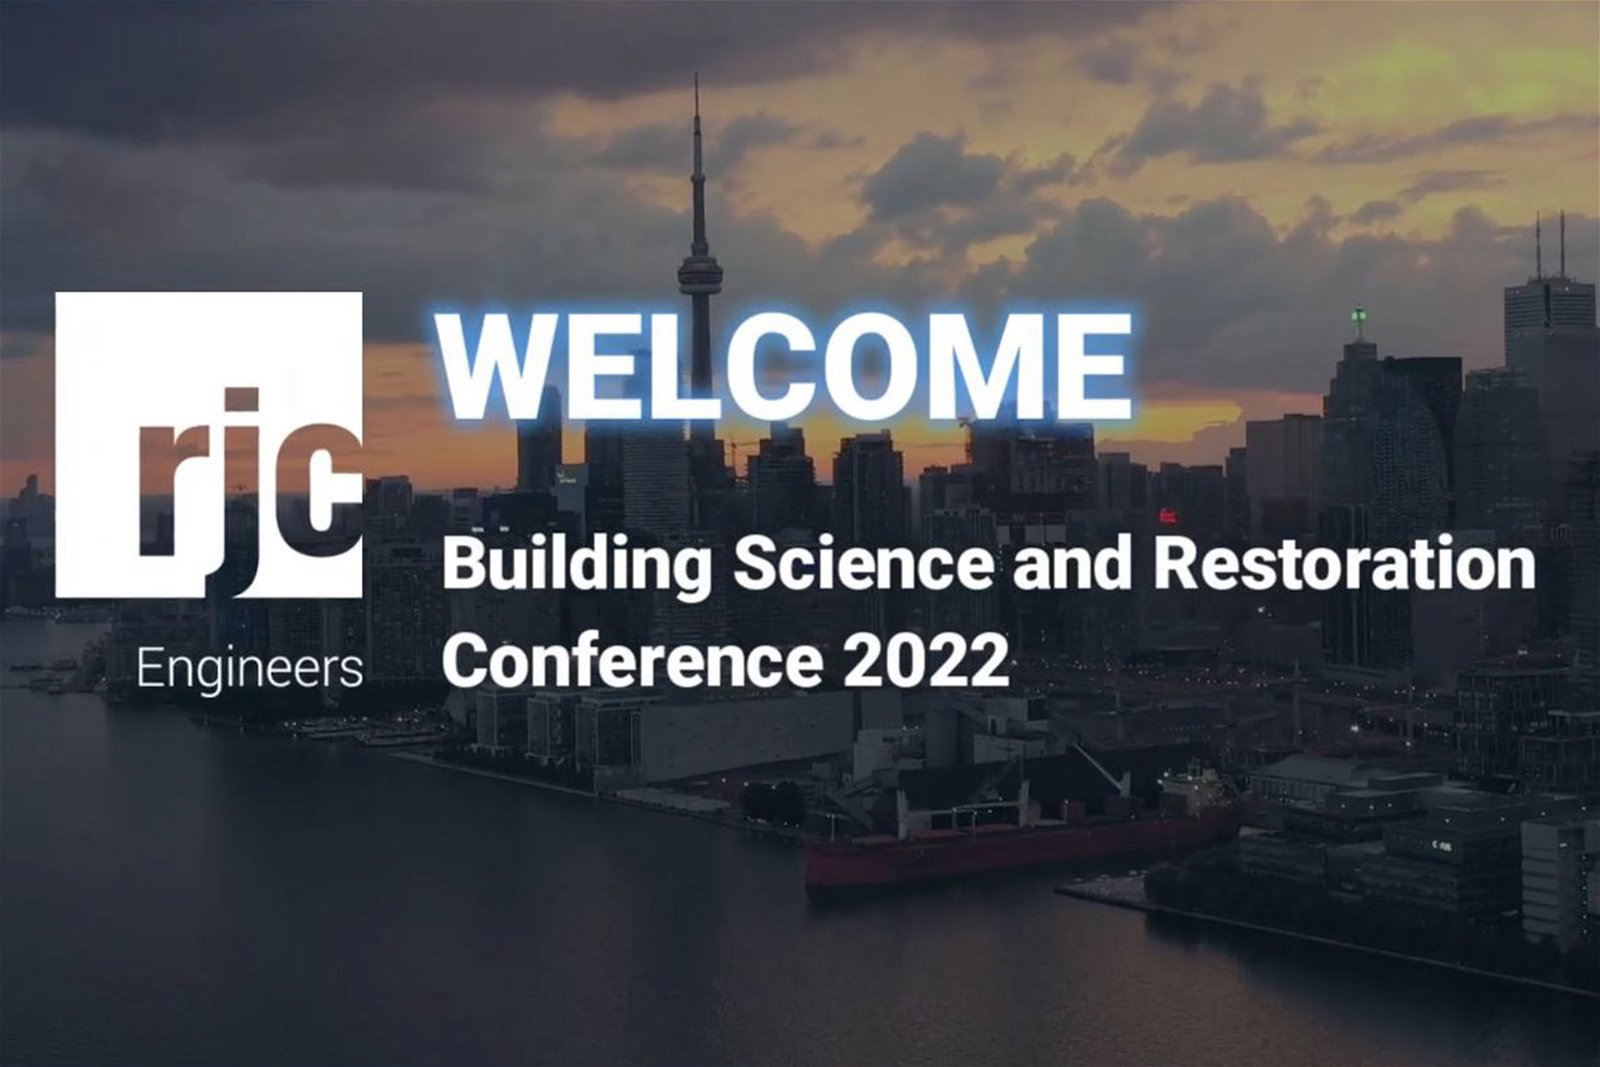 RJC Engineers | Building Science & Restoration Conference 2022